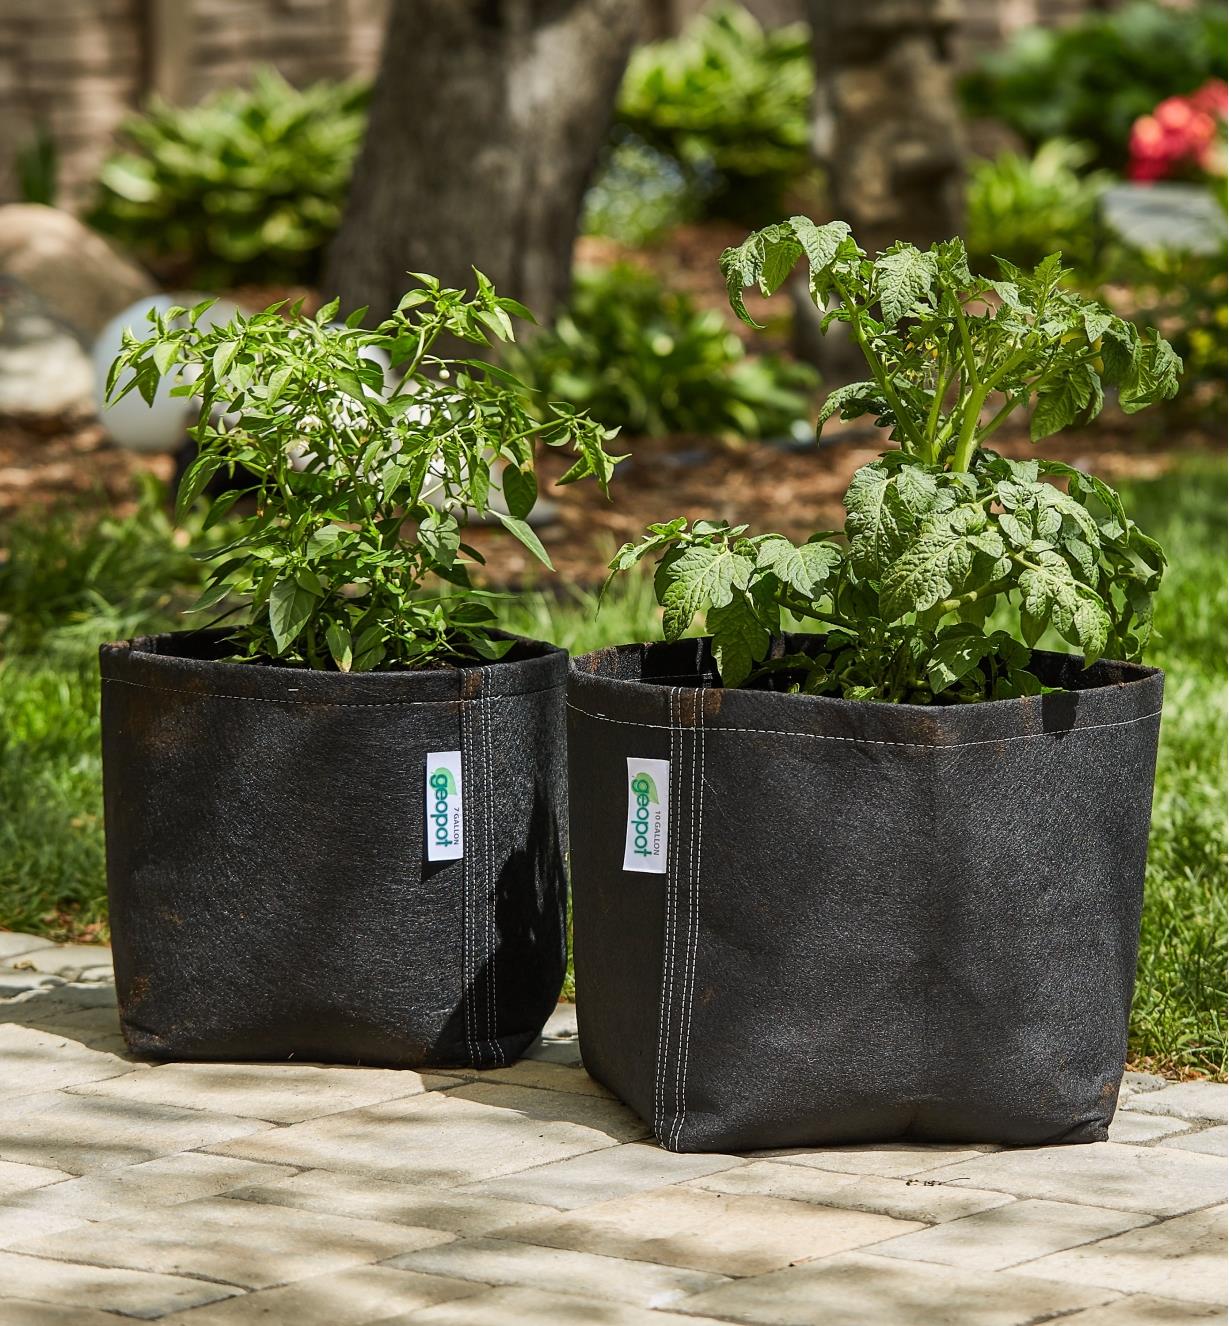 Container Gardening: Growing In Fabric Pots